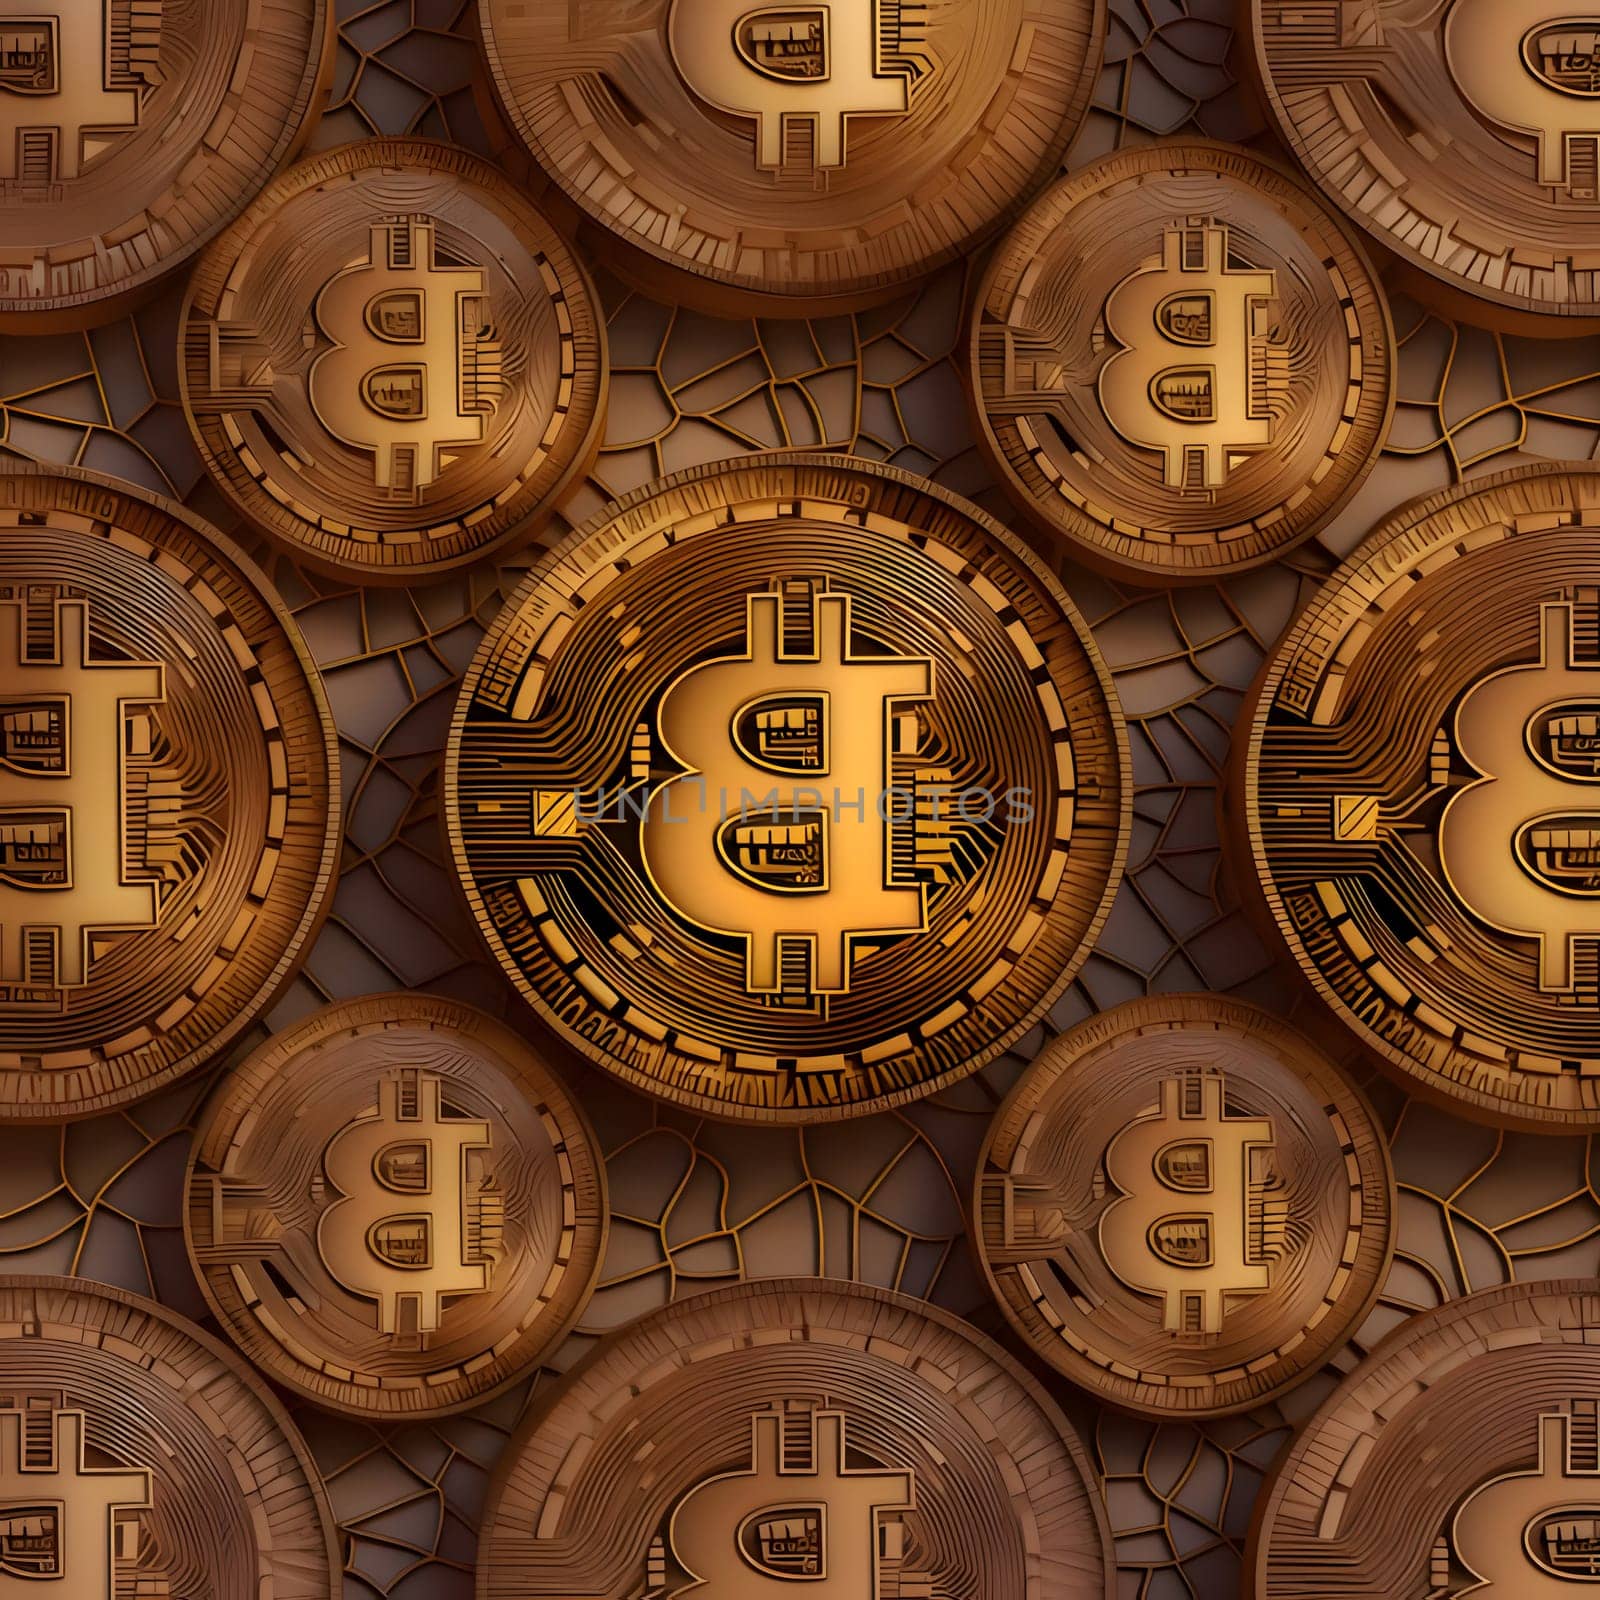 Bitcoin. Cryptocurrency. Golden coins with bitcoin symbol on cracked background. 3D rendering by ThemesS